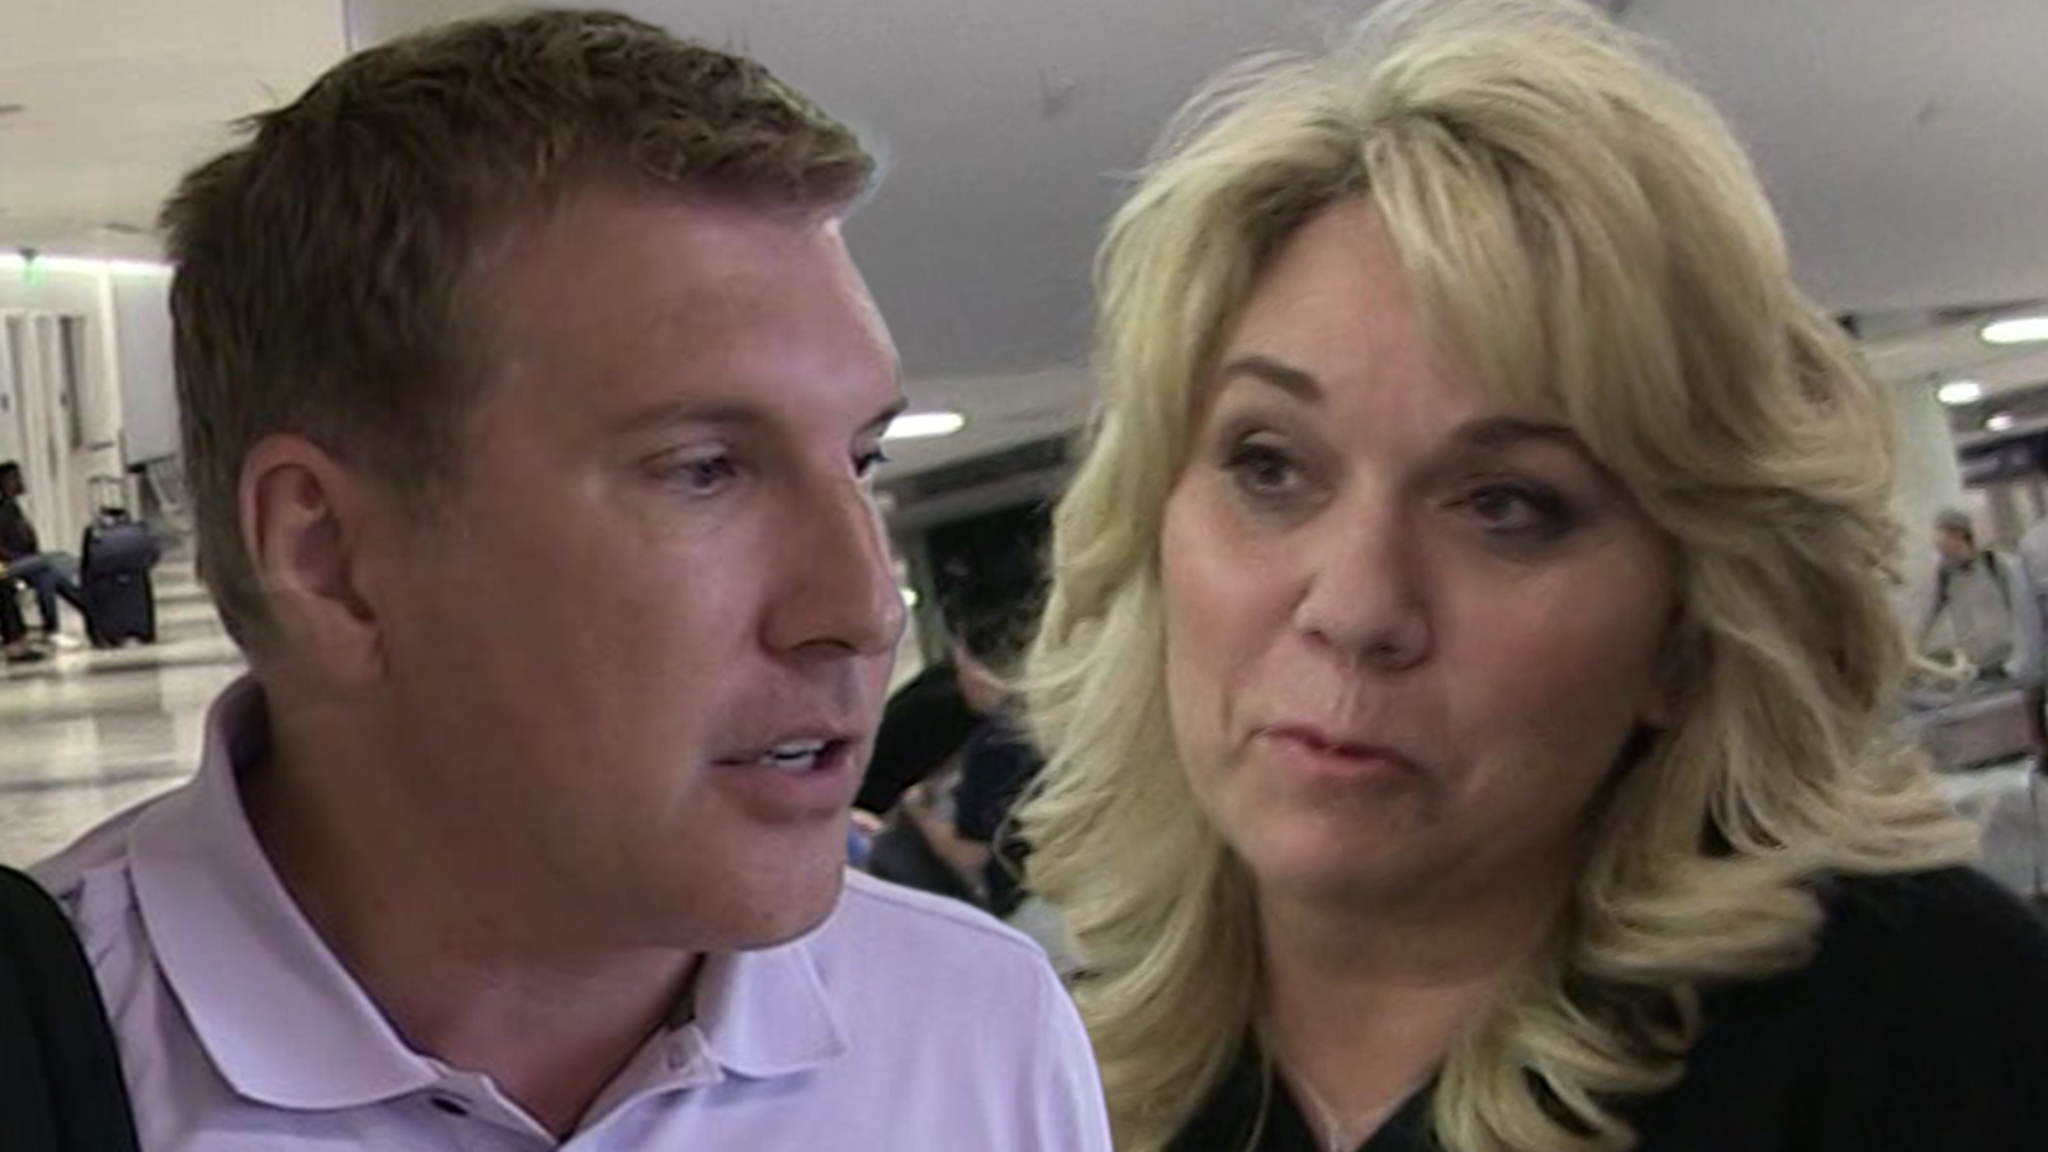 Todd Chrisley Sentenced to 12 Years in Prison for Bank Fraud, Tax Evasion Case